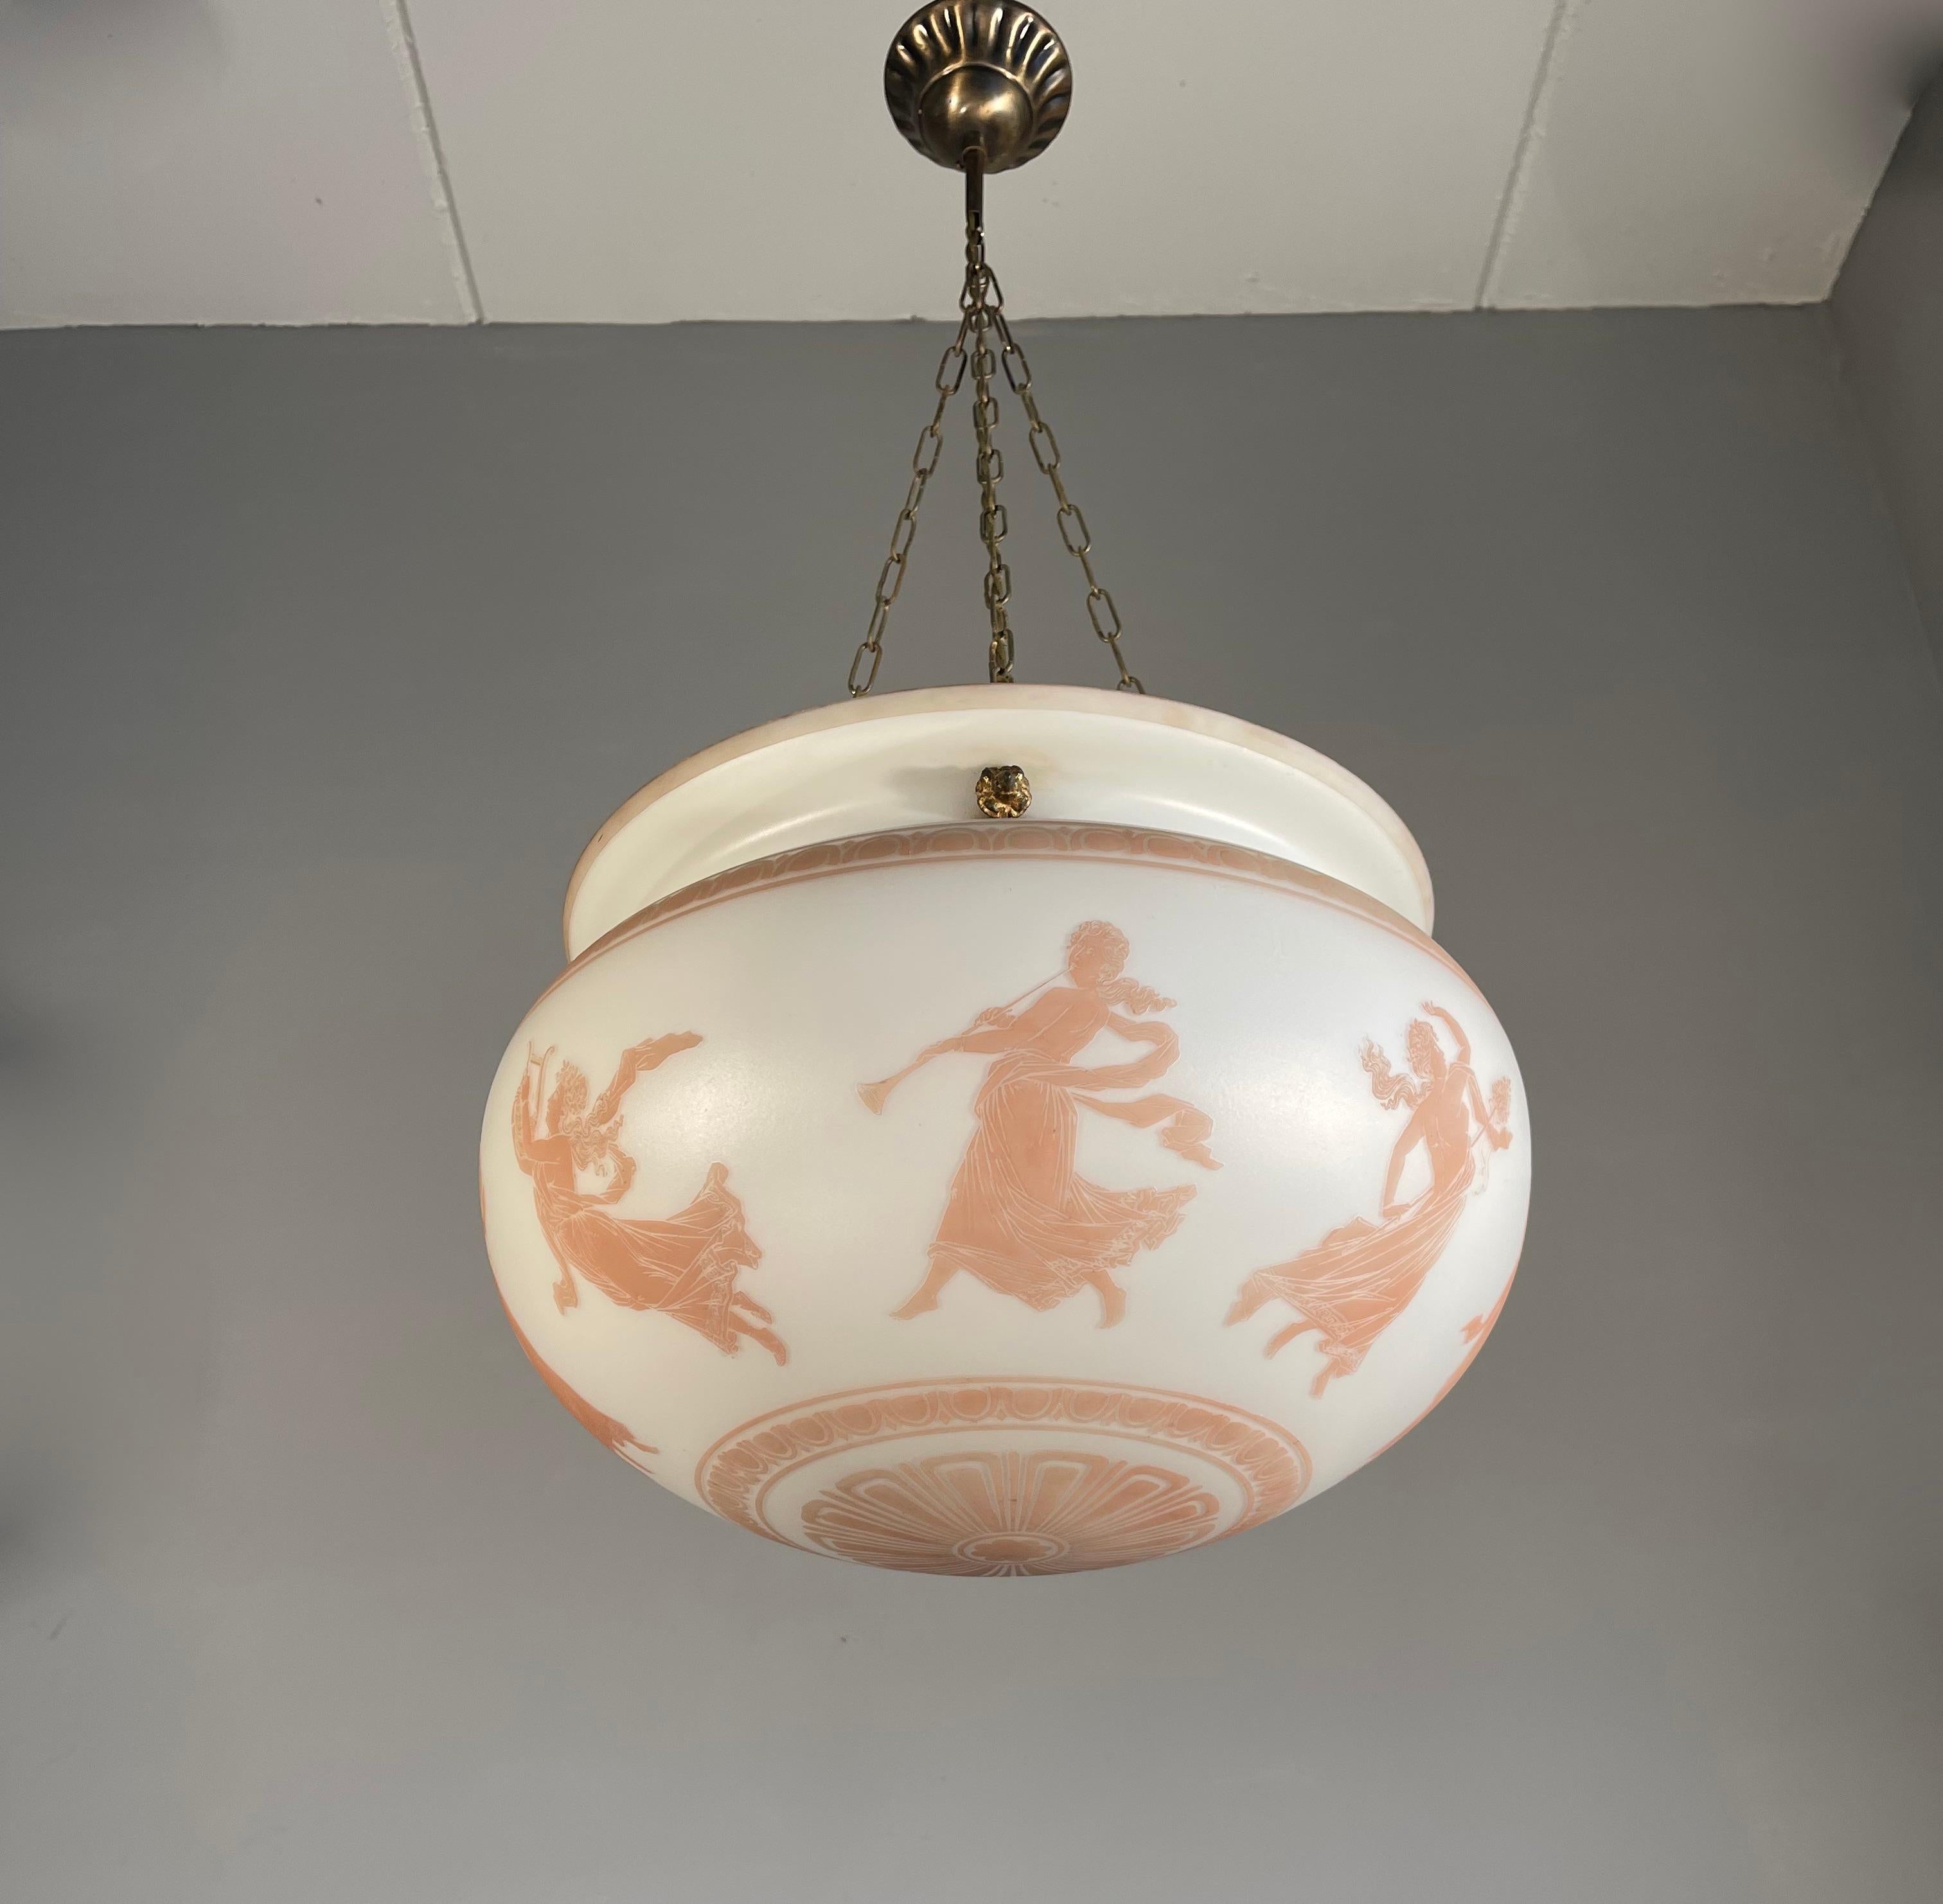 Antique and stunning Italian work of lighting art, 1920.

If you are passionate about early 20th century decorative art then you will love this one of a kind, opaline glass light fixture. What you are seeing here is a possibly unique pendant, with